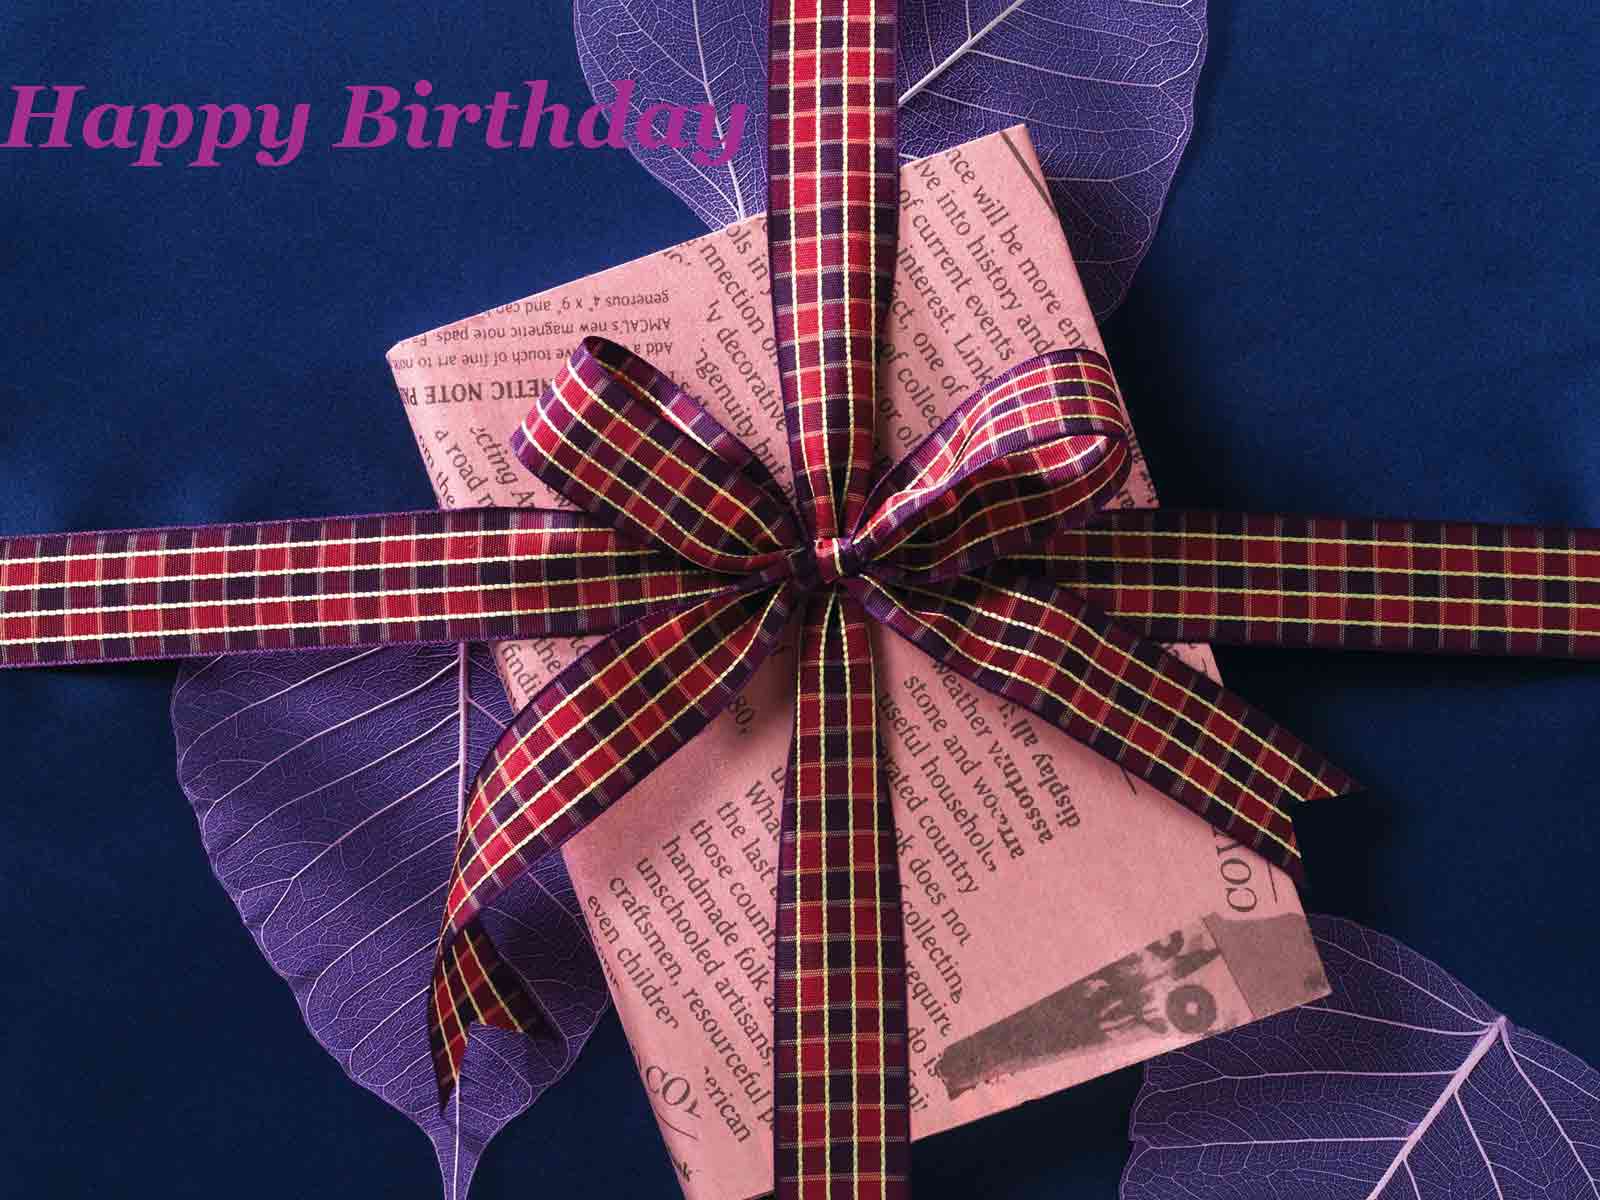 The Collection of Funny Birthday Wishes to Make Your Best Friend Laugh 2